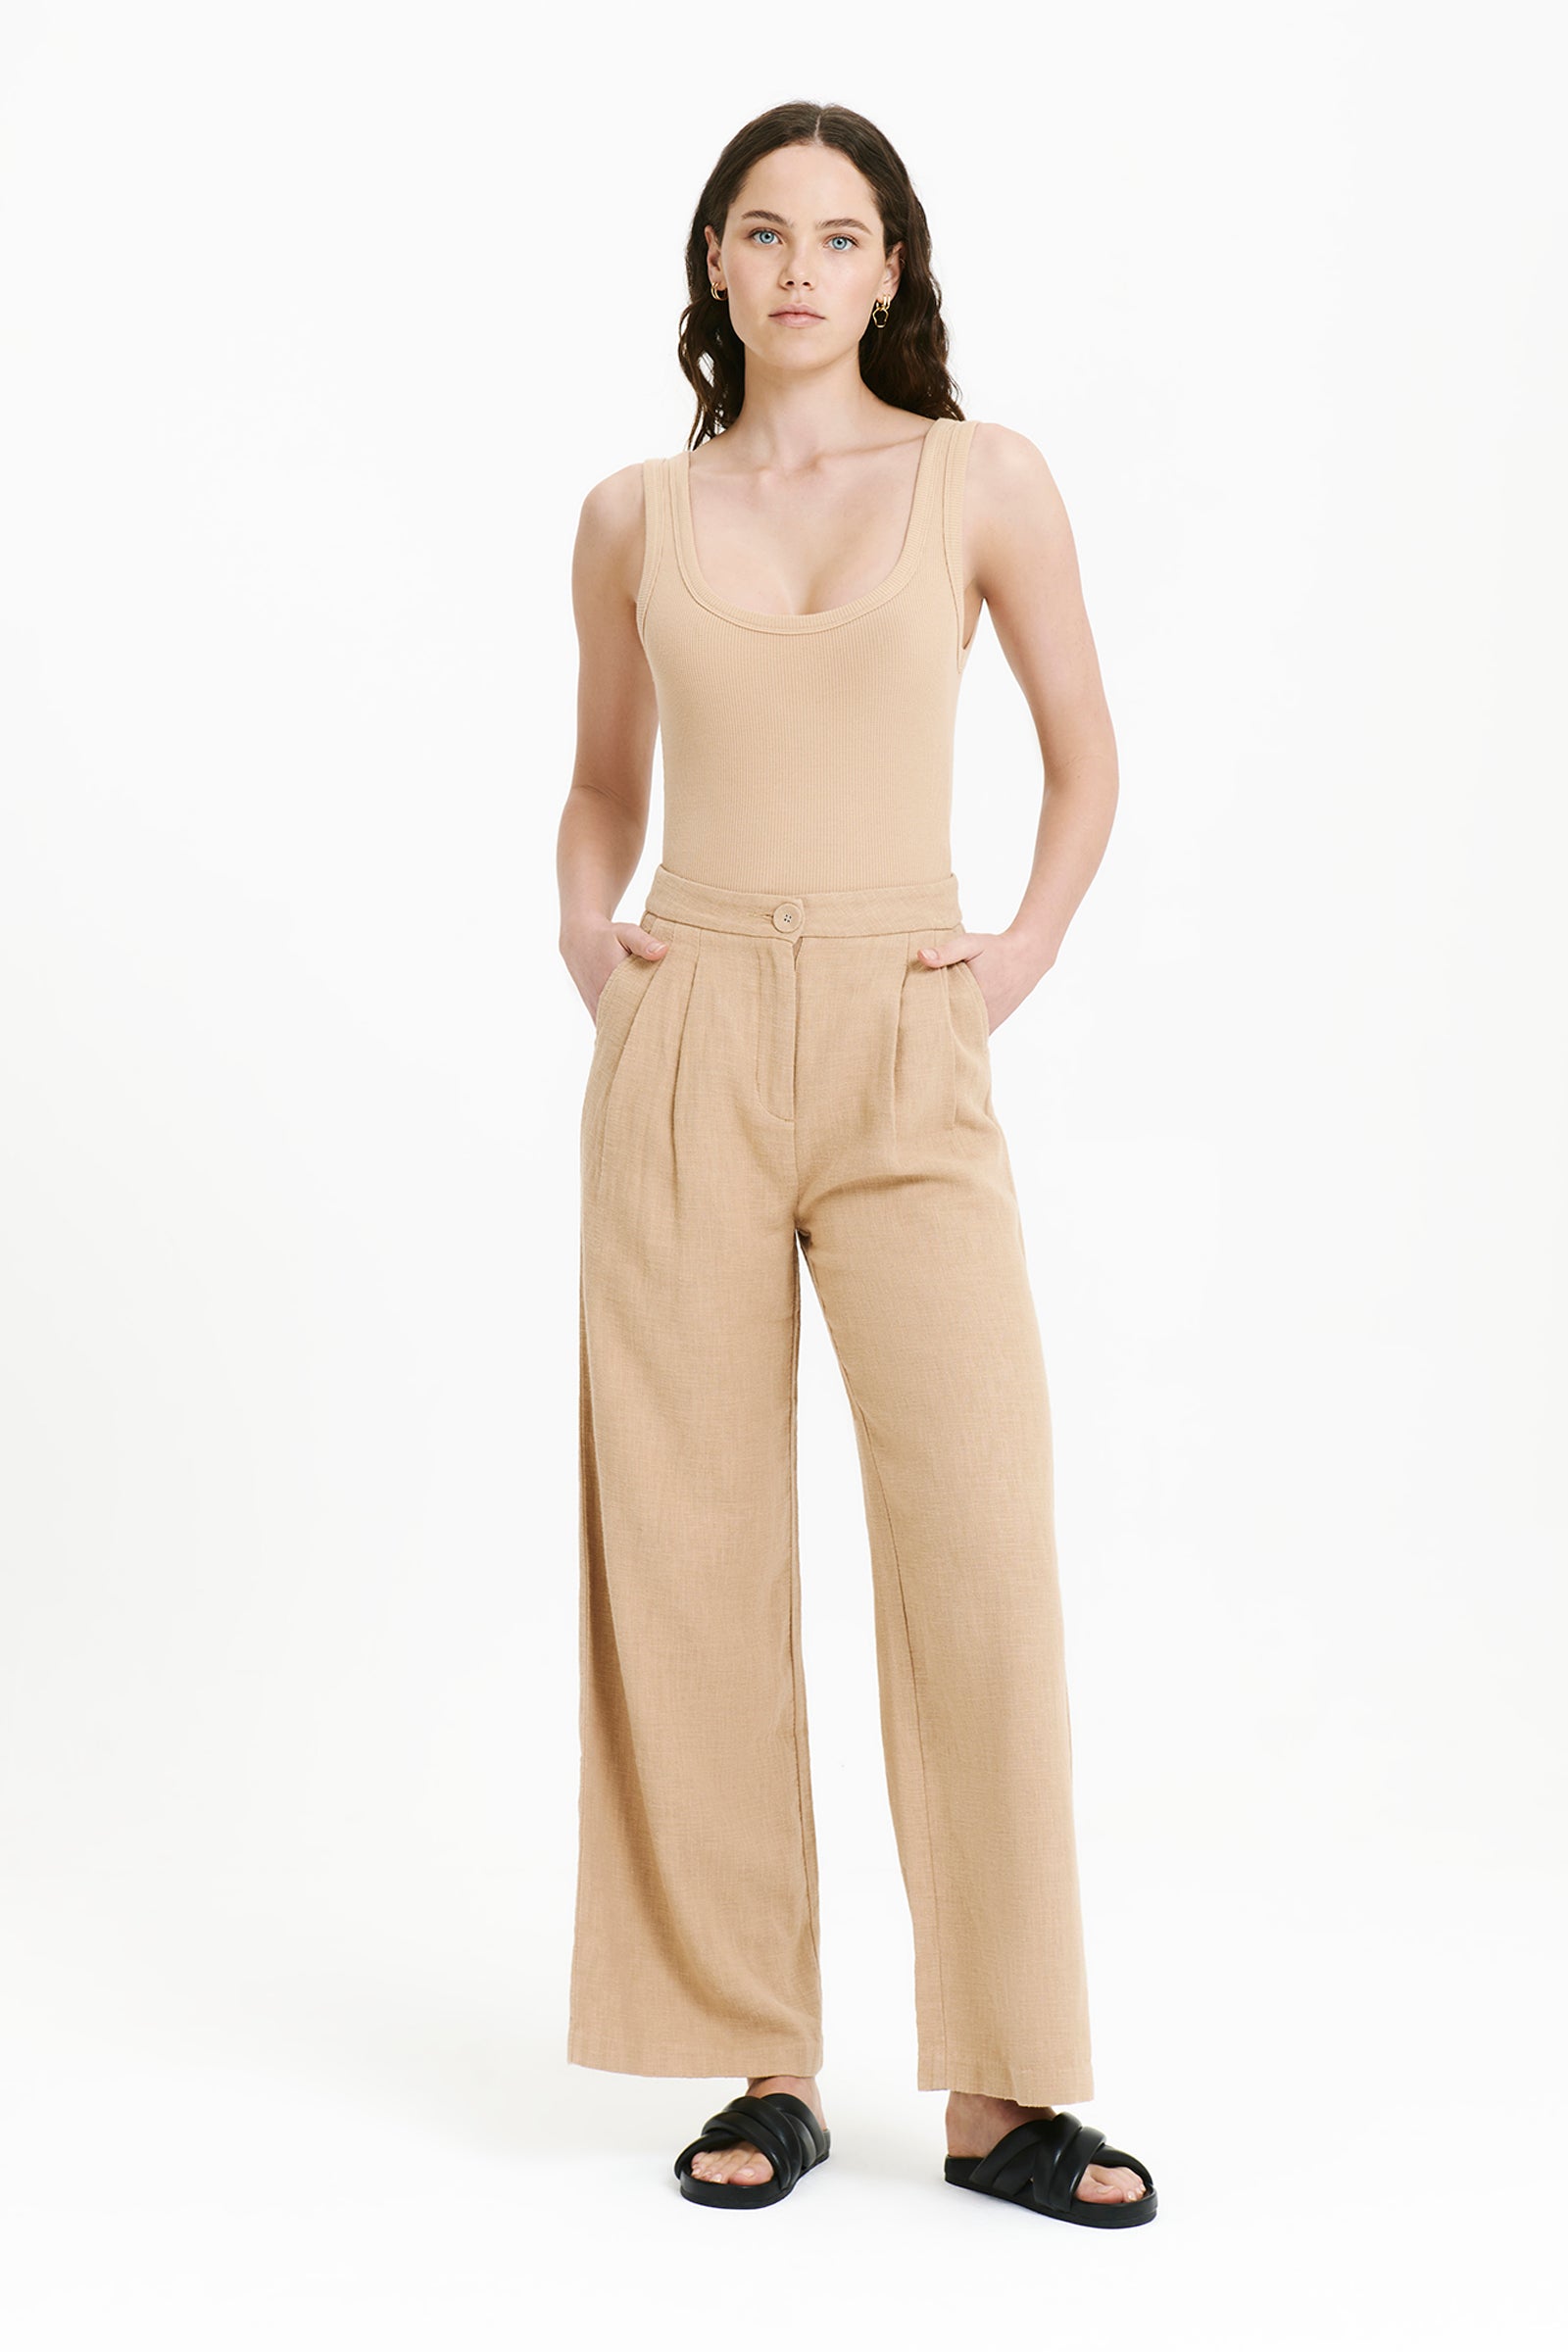 Nude Lucy Blair Tailored Pant In A Light Yellow Toned Dune Colour